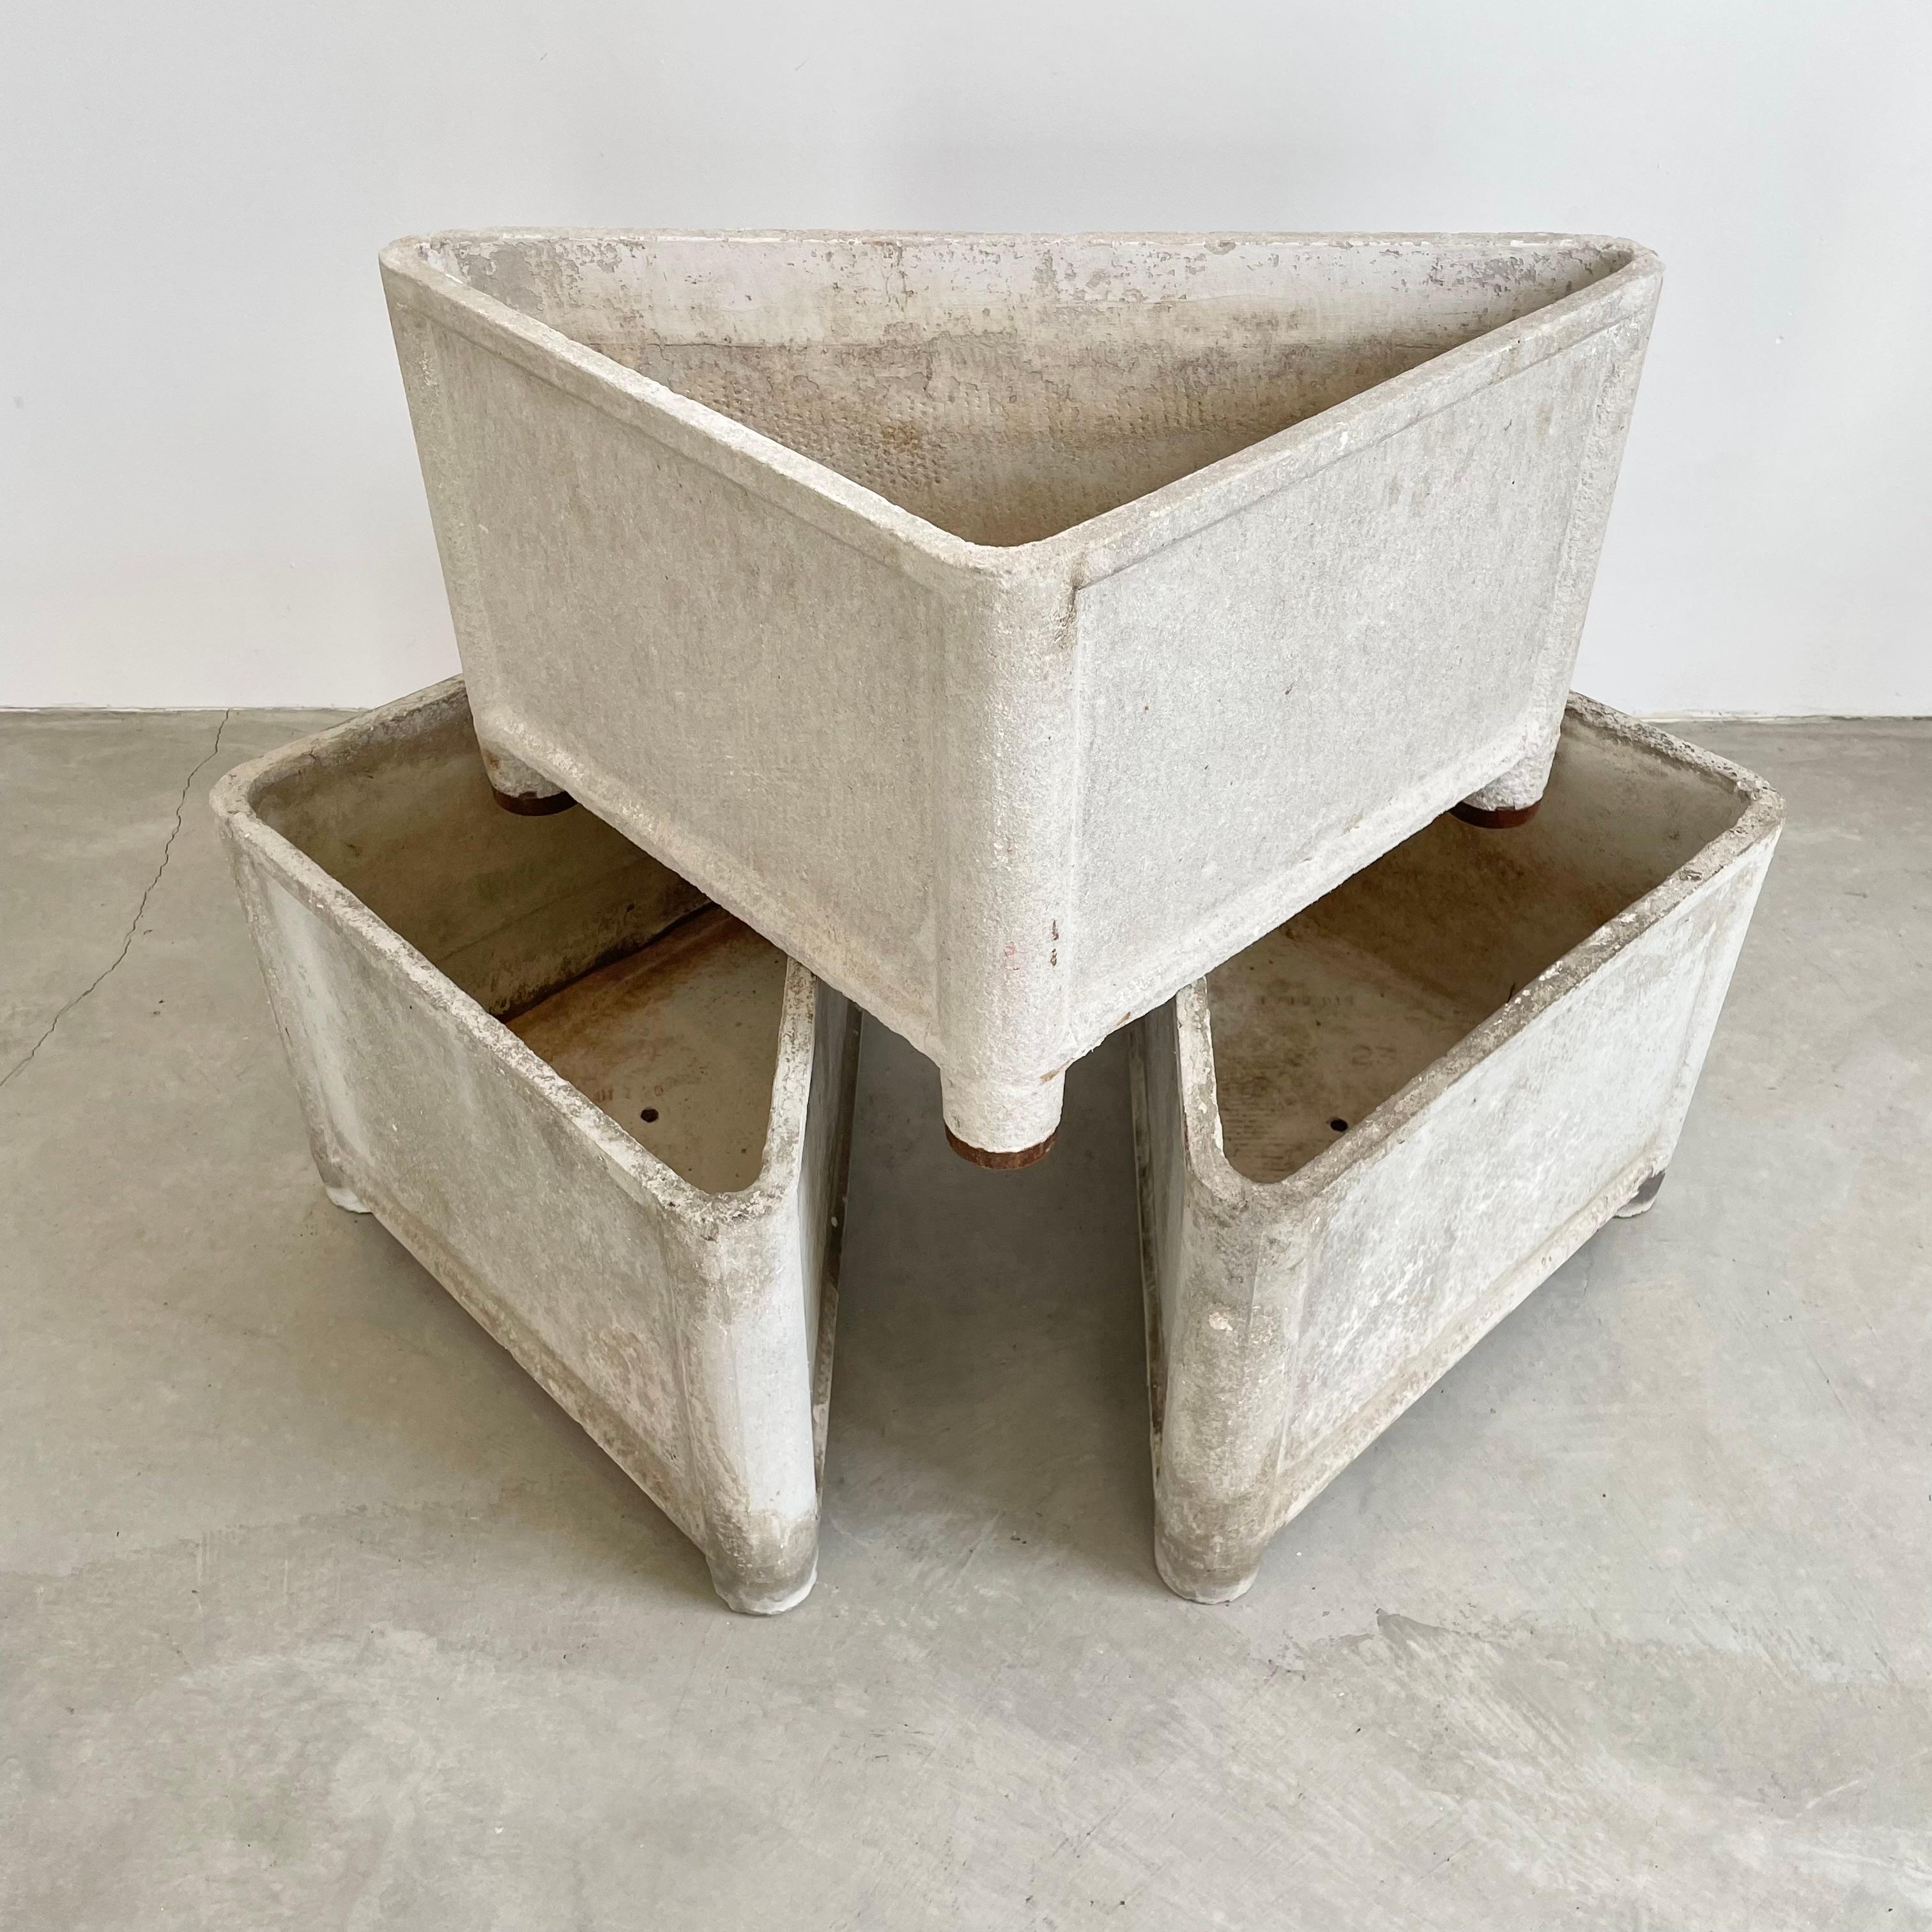 Sculptural triangular concrete planters by Swiss Architect Willy Guhl. Each planter has a concrete leg at each corner of the planter which allows the planter to float a couple of inches above the ground. All pieces dated, and marked with factory